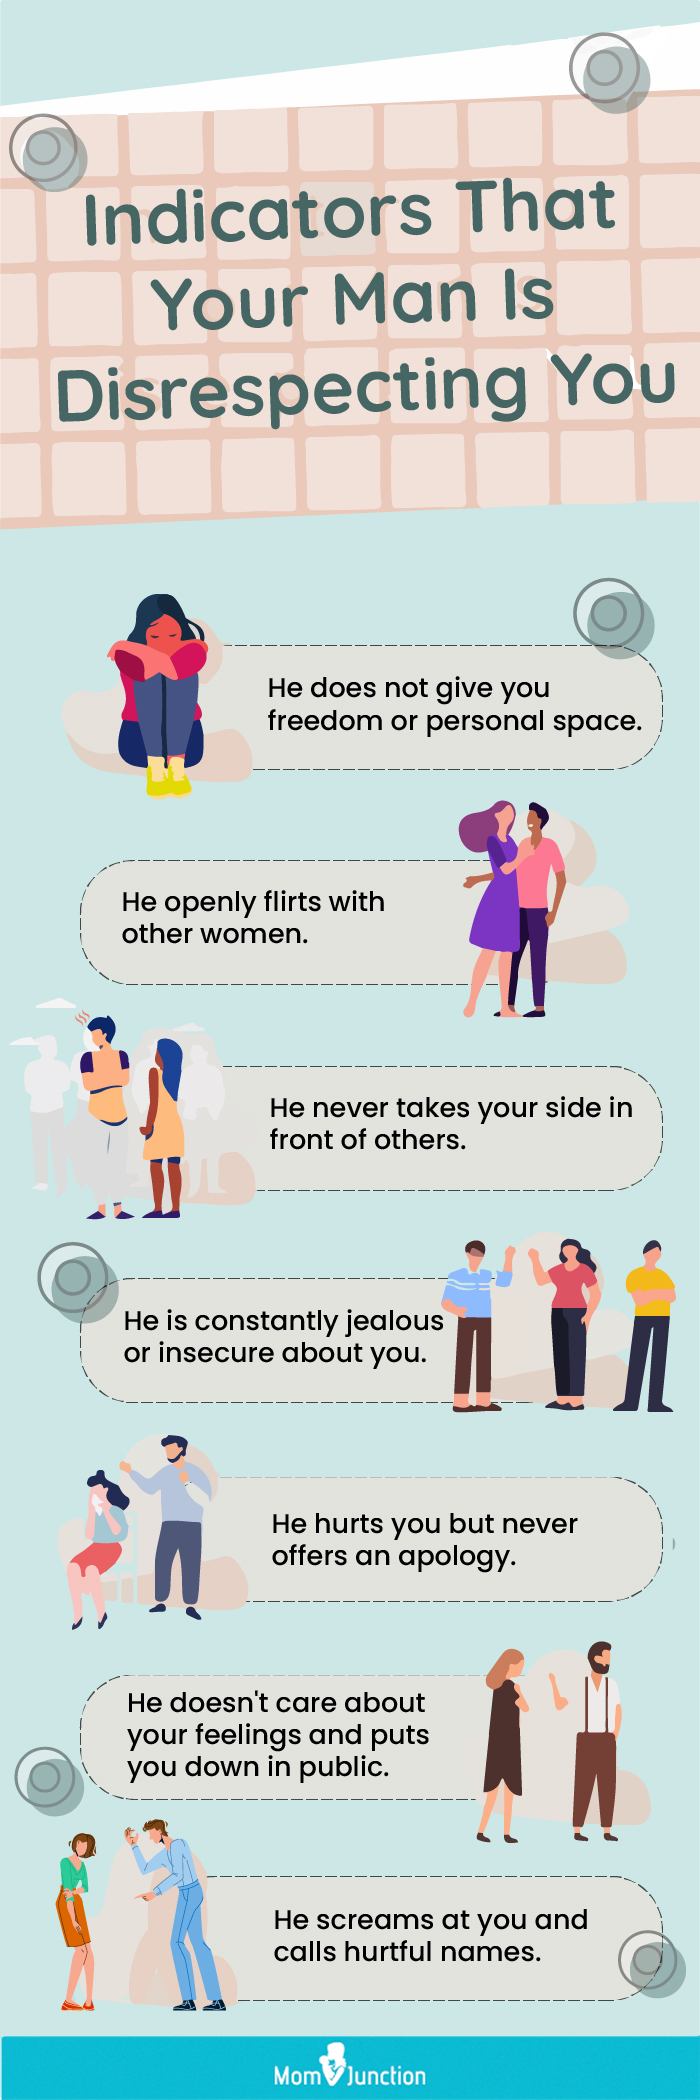 indicators that your man is disrespecting you (infographic)